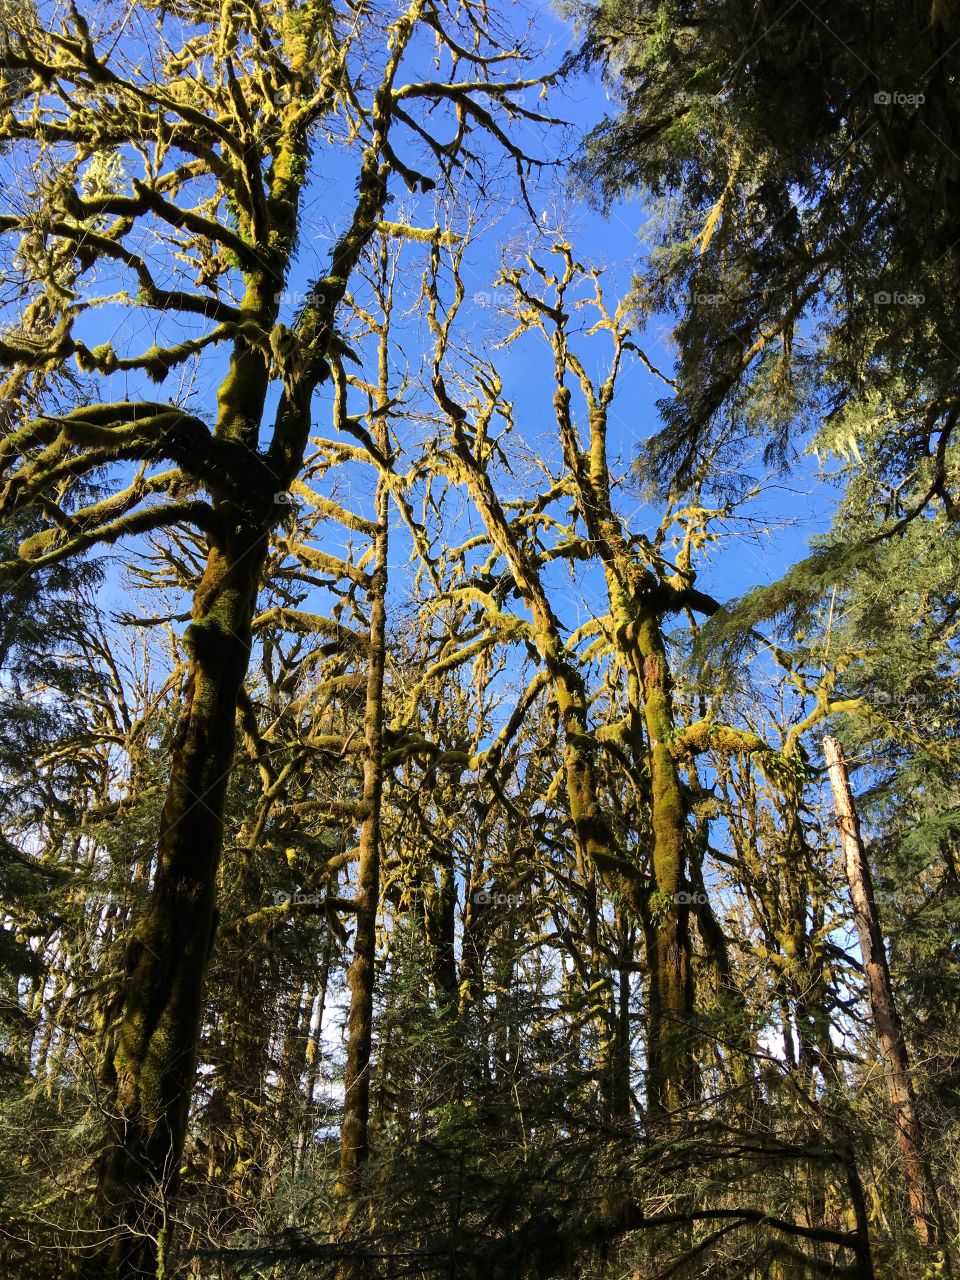 Sun shining on mossy big leaf maple trees in the Pacific Northwest winter forest. 